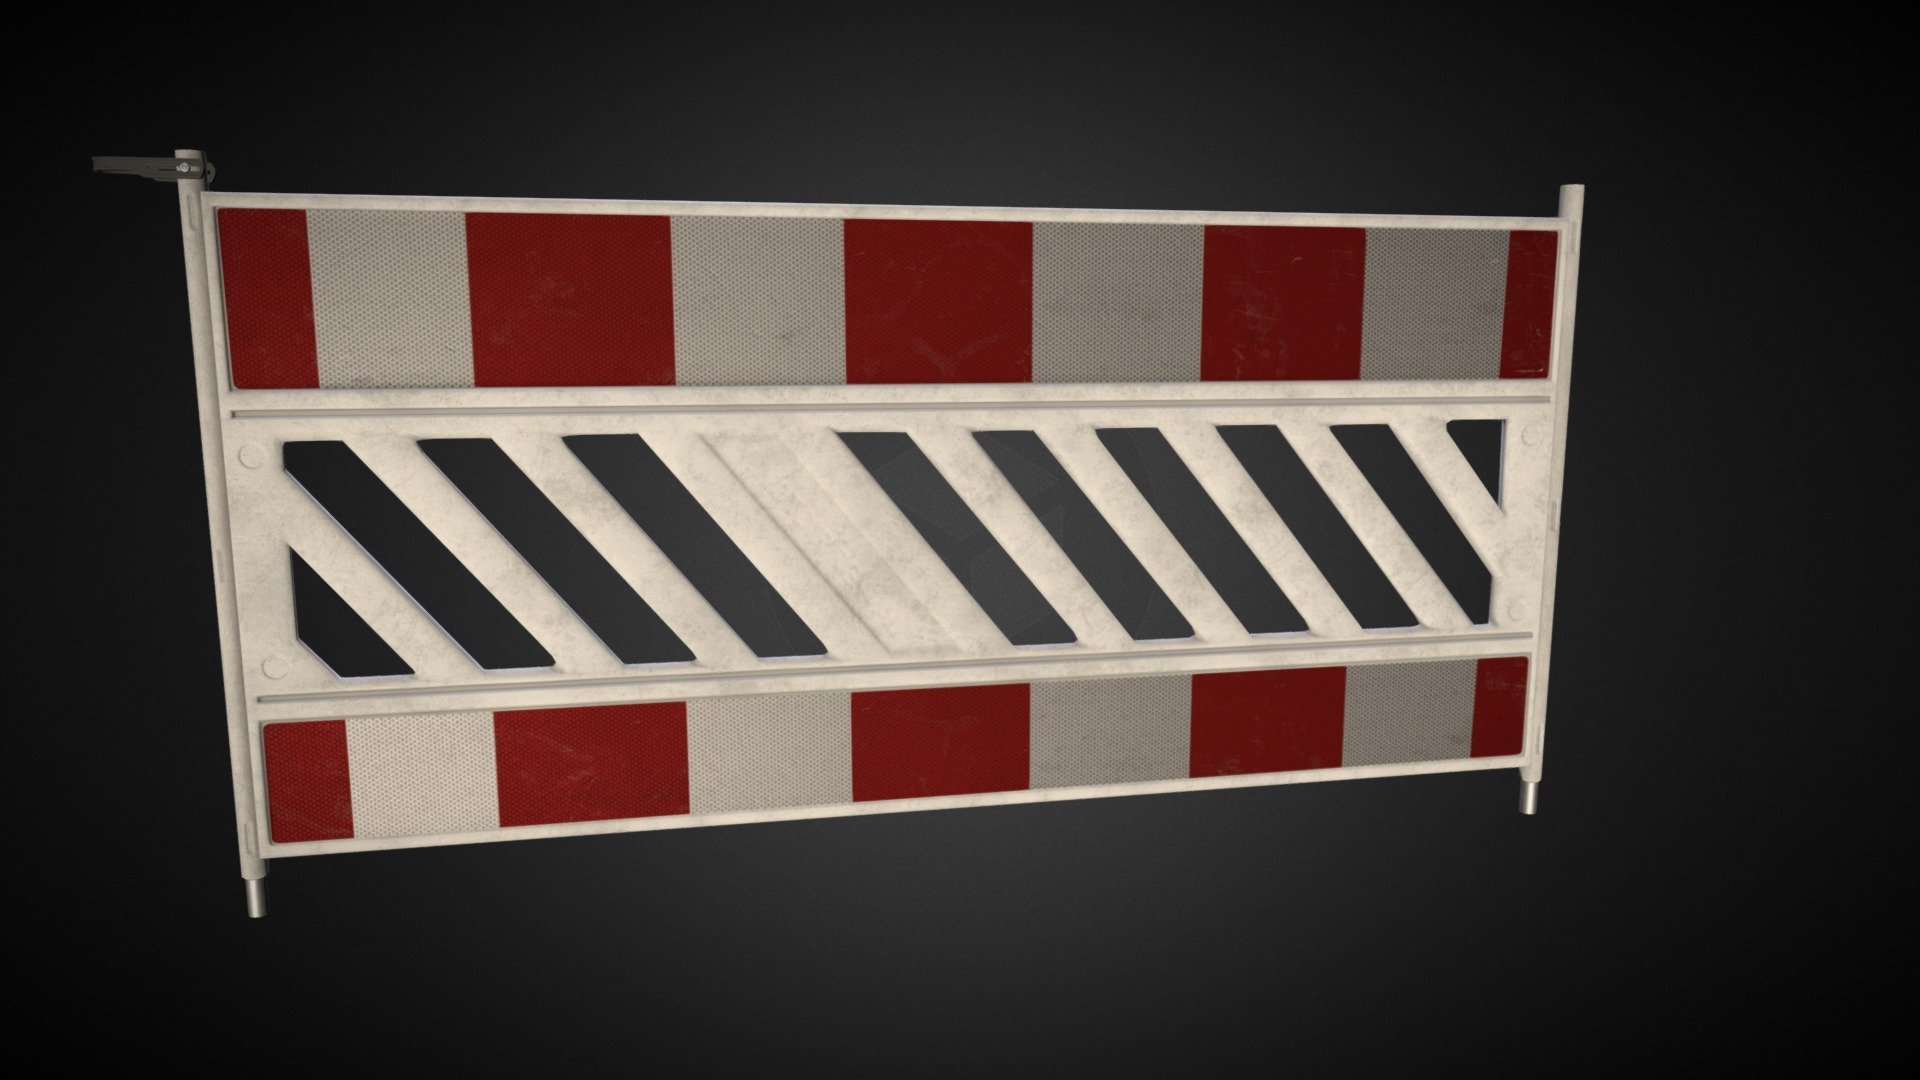 UPDATE 29/09/21: Fixed a small bug, further optimized geometry &amp; textures

Roadwork / Plastic Traffic Barrier Fence 

LP / Game Ready / 2048x2048 PBR Materials

Modeled after fences that are found on German streets but generaly used all over Europe. 

Modeled in Blender, Textured in Substance Painter.

Liking and following is just a click away and significantly boosts my self confidence, so why not do it? And let me know if you’ve used this chair, would love to see your work! High Poly &amp; 4K texture model available upon request.

Contact: hello@notoir.xyz More 3D goodness: https://notoir.xyz/featured-links/

See it in action:

 - Roadwork Barrier Fence - Low Poly Model - Buy Royalty Free 3D model by NOTOIR.XYZ (@Notoir) 3d model